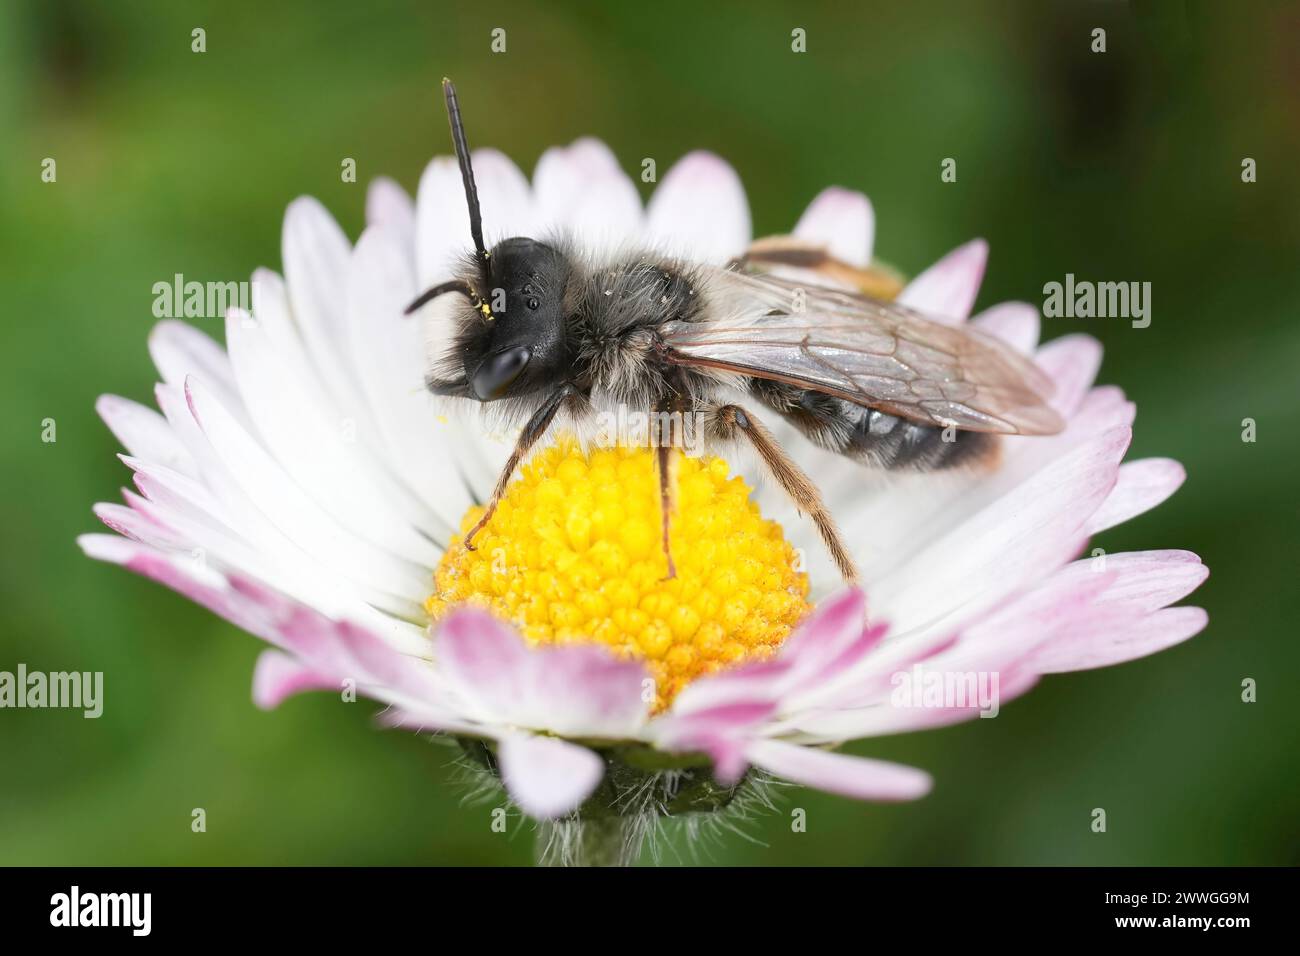 Natural closeup on a male Grey-backed mining bee, Andrena vaga sitting in a common daisy flower Stock Photo